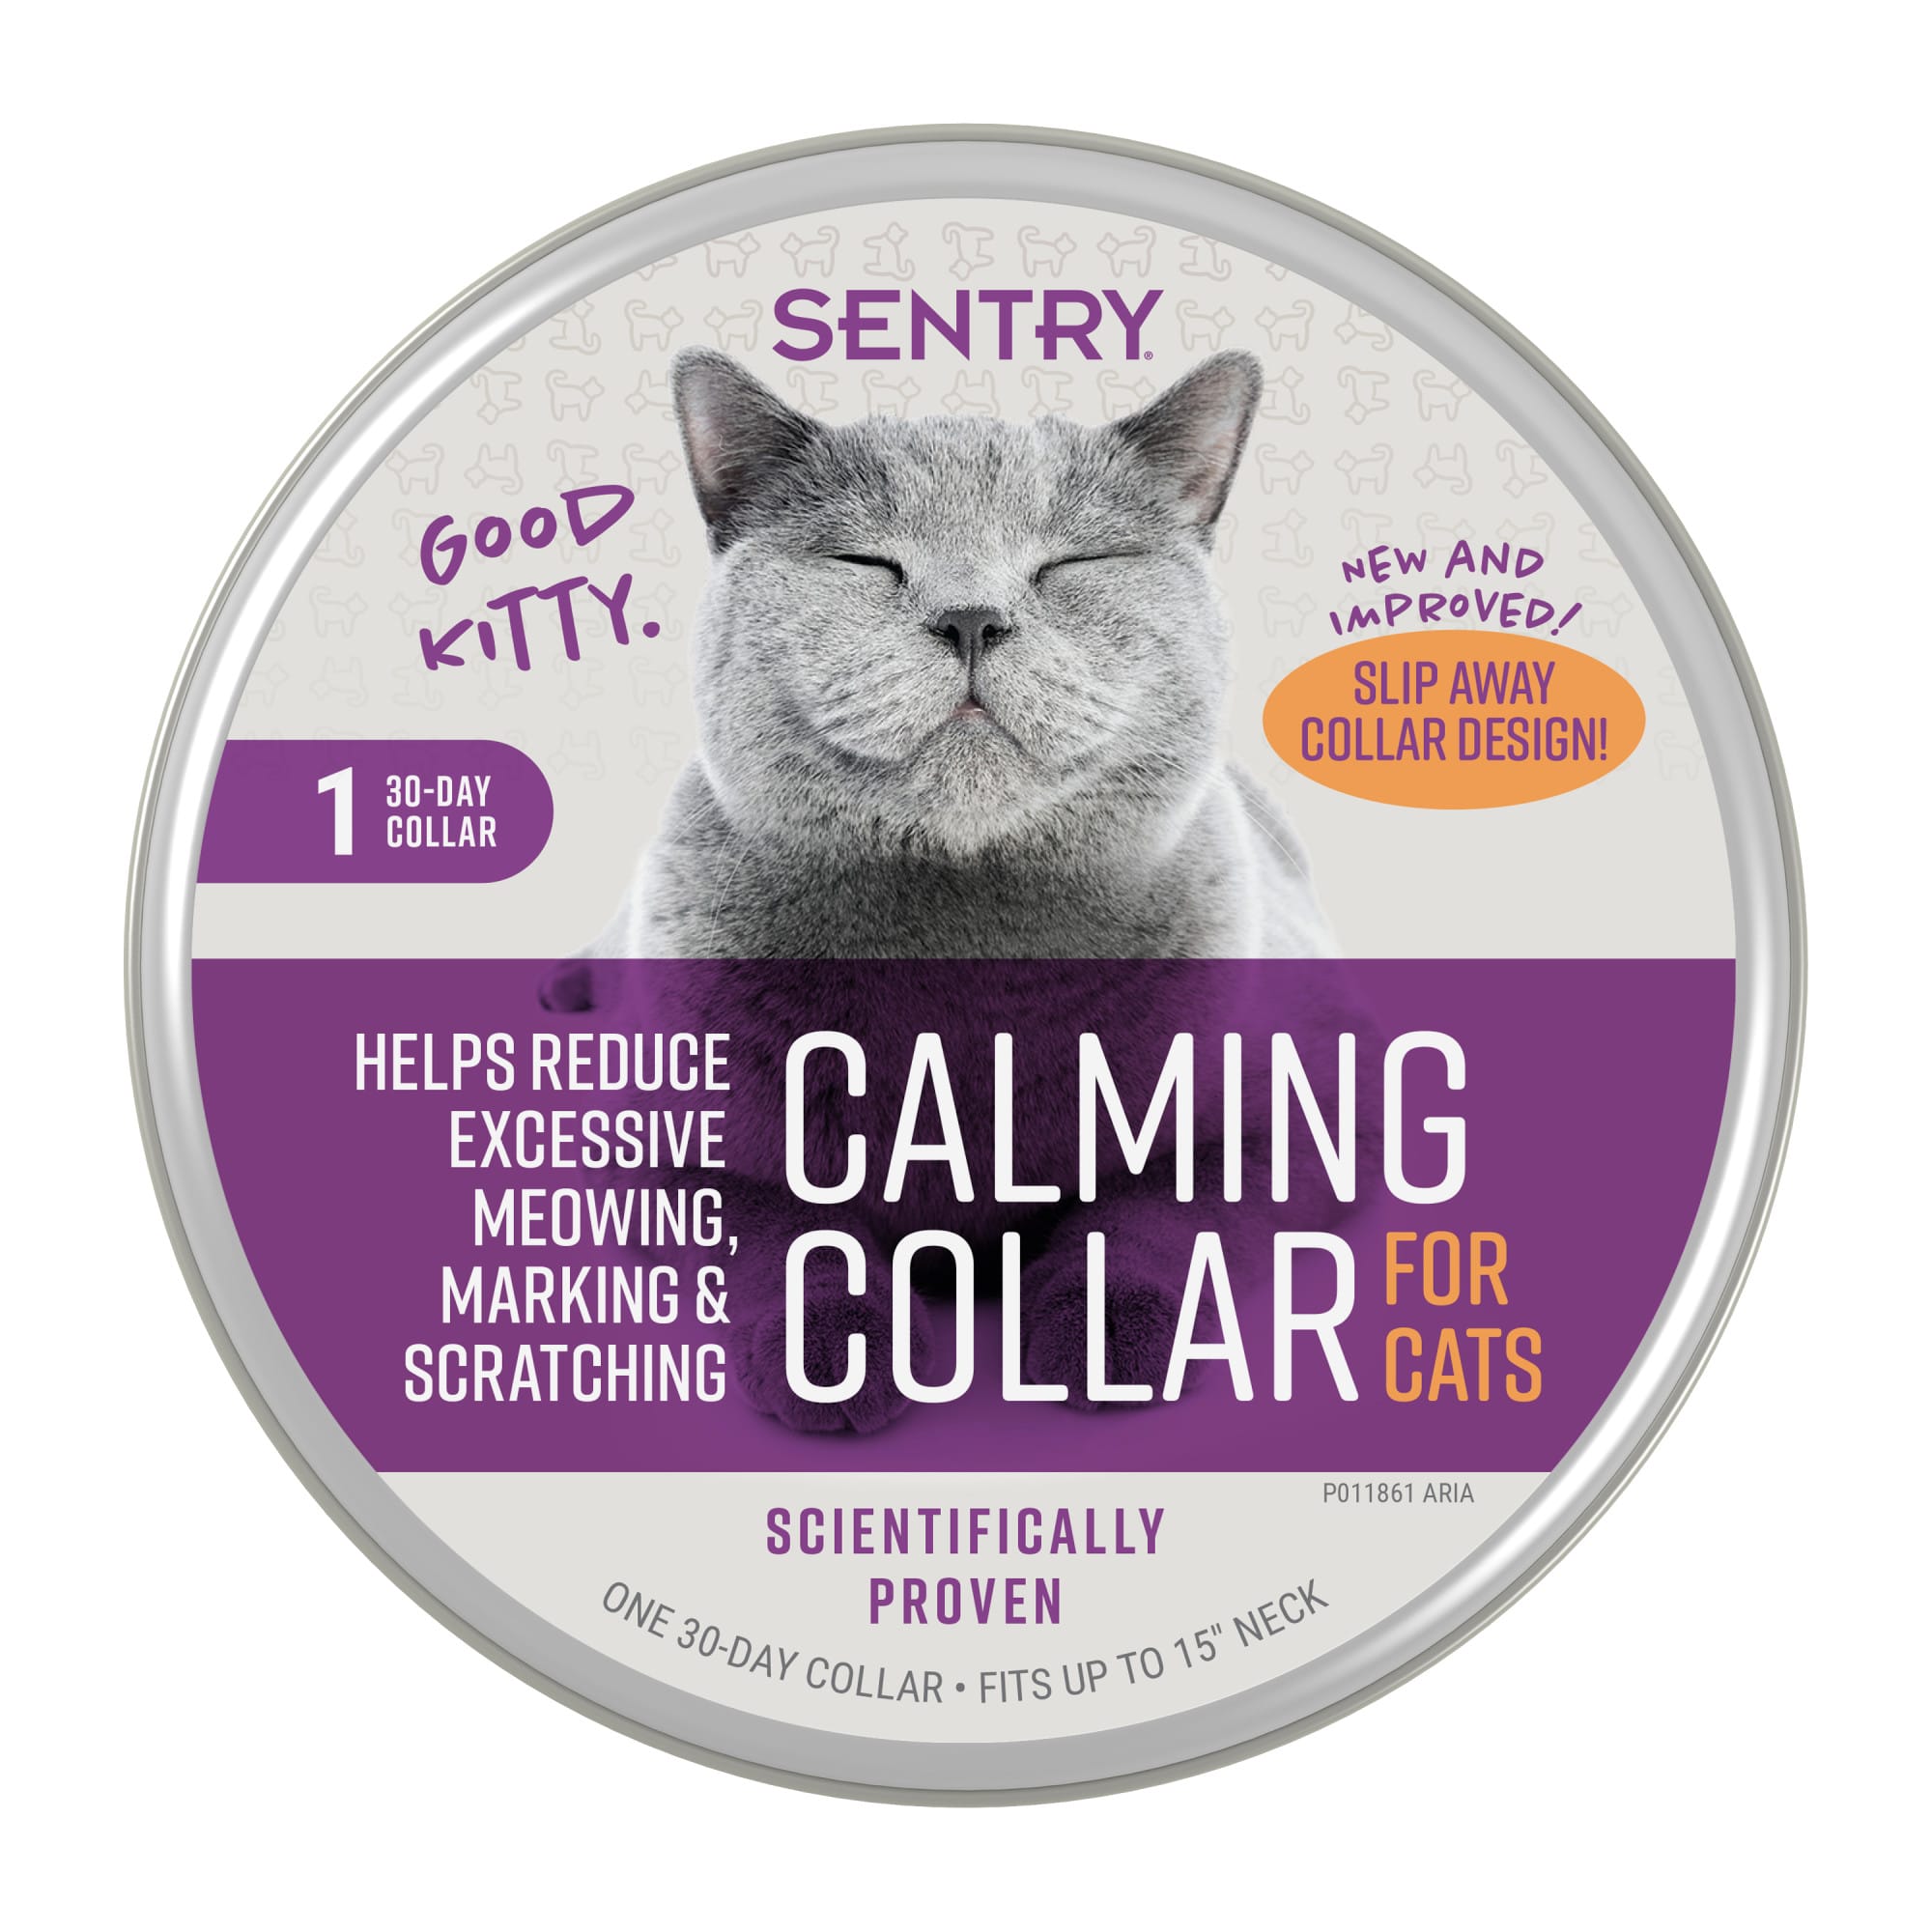 Sentry Good Kitty Calming Collar for Cats image